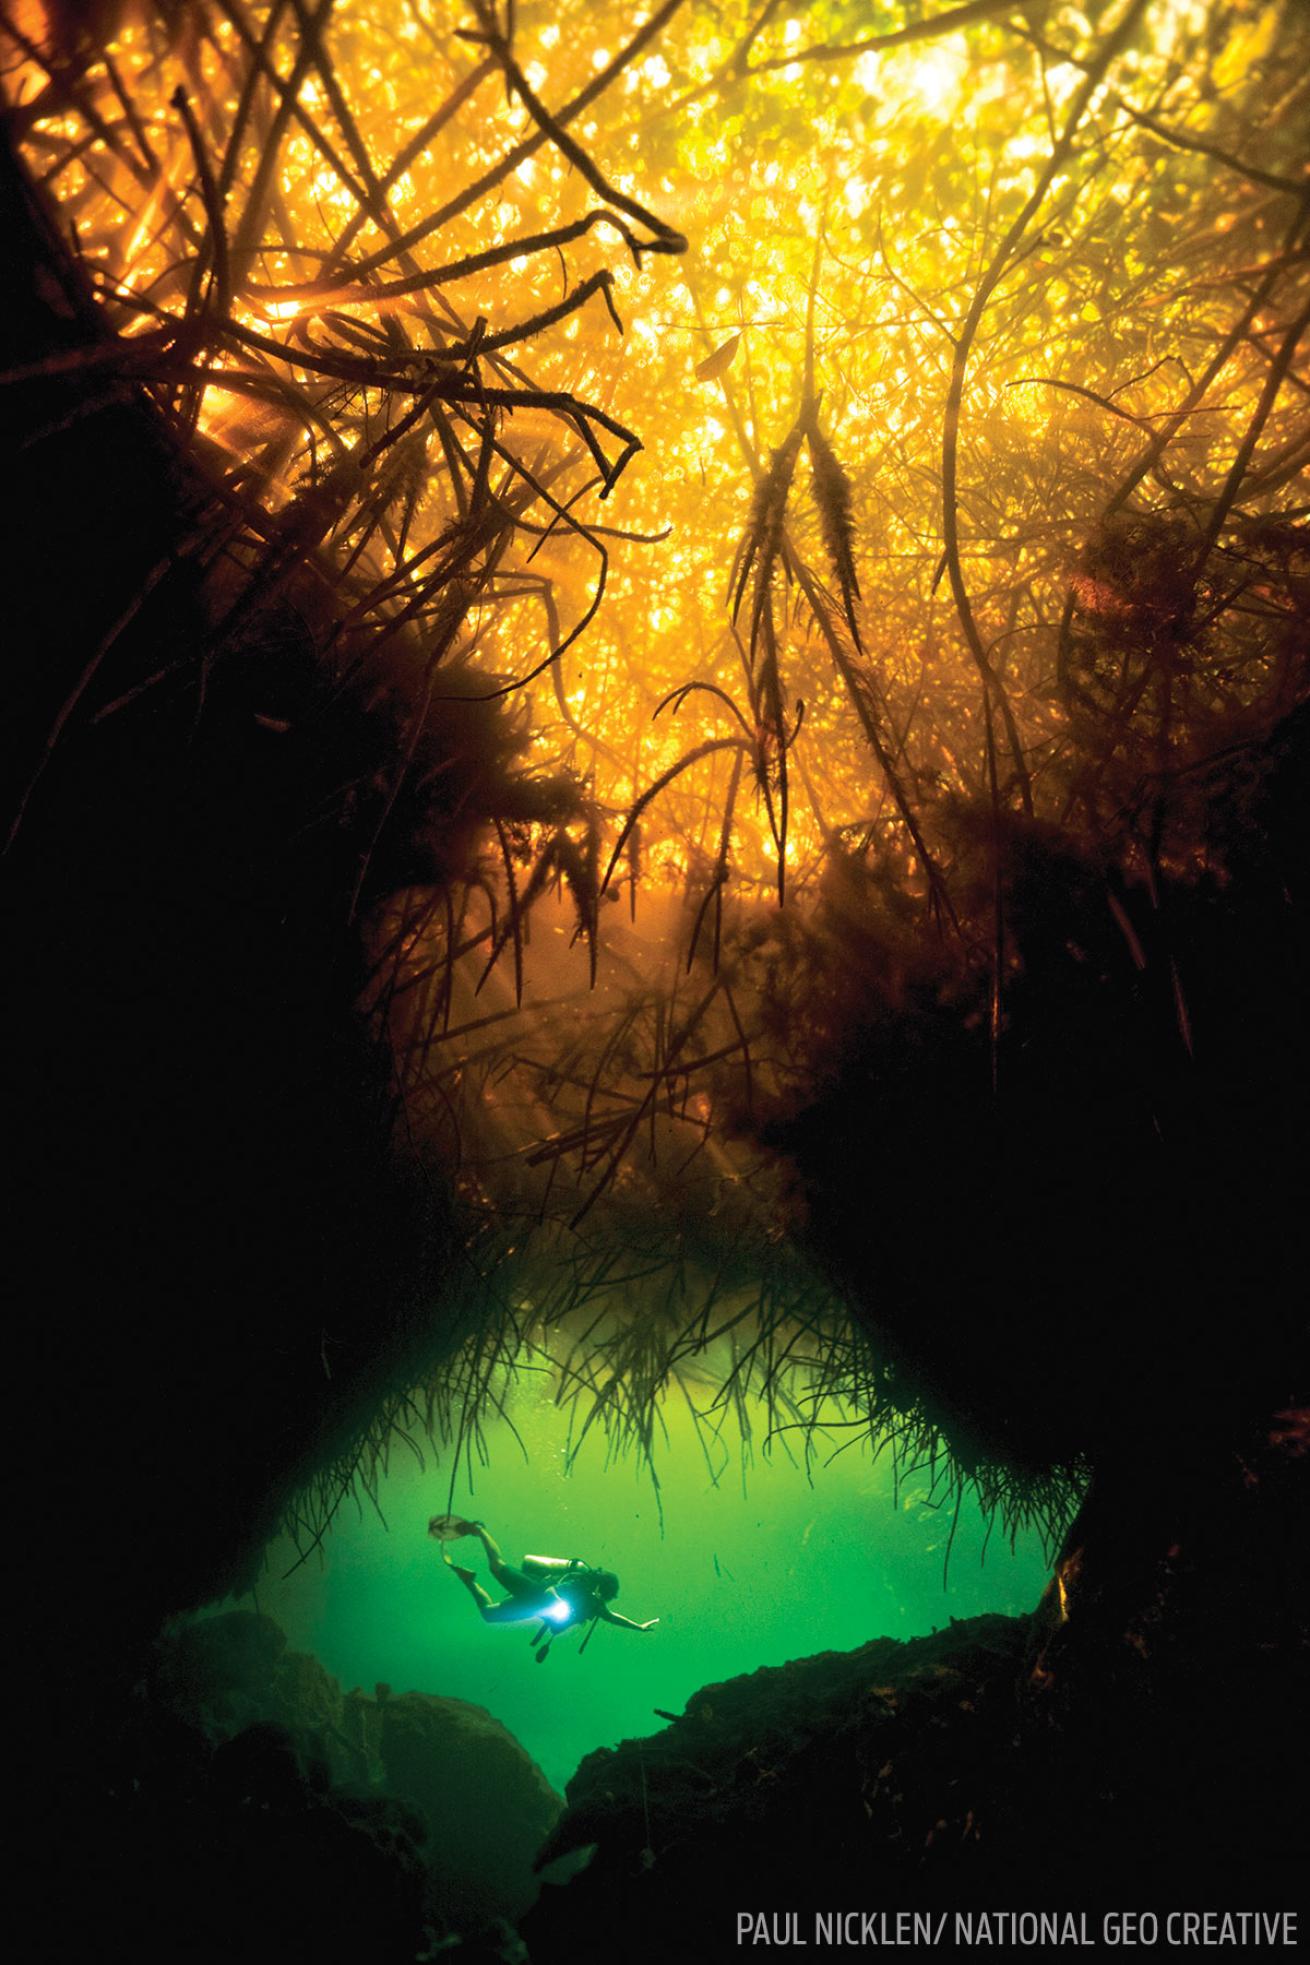 Scuba diving the cenotes and caverns in the Yucatan Peninsula